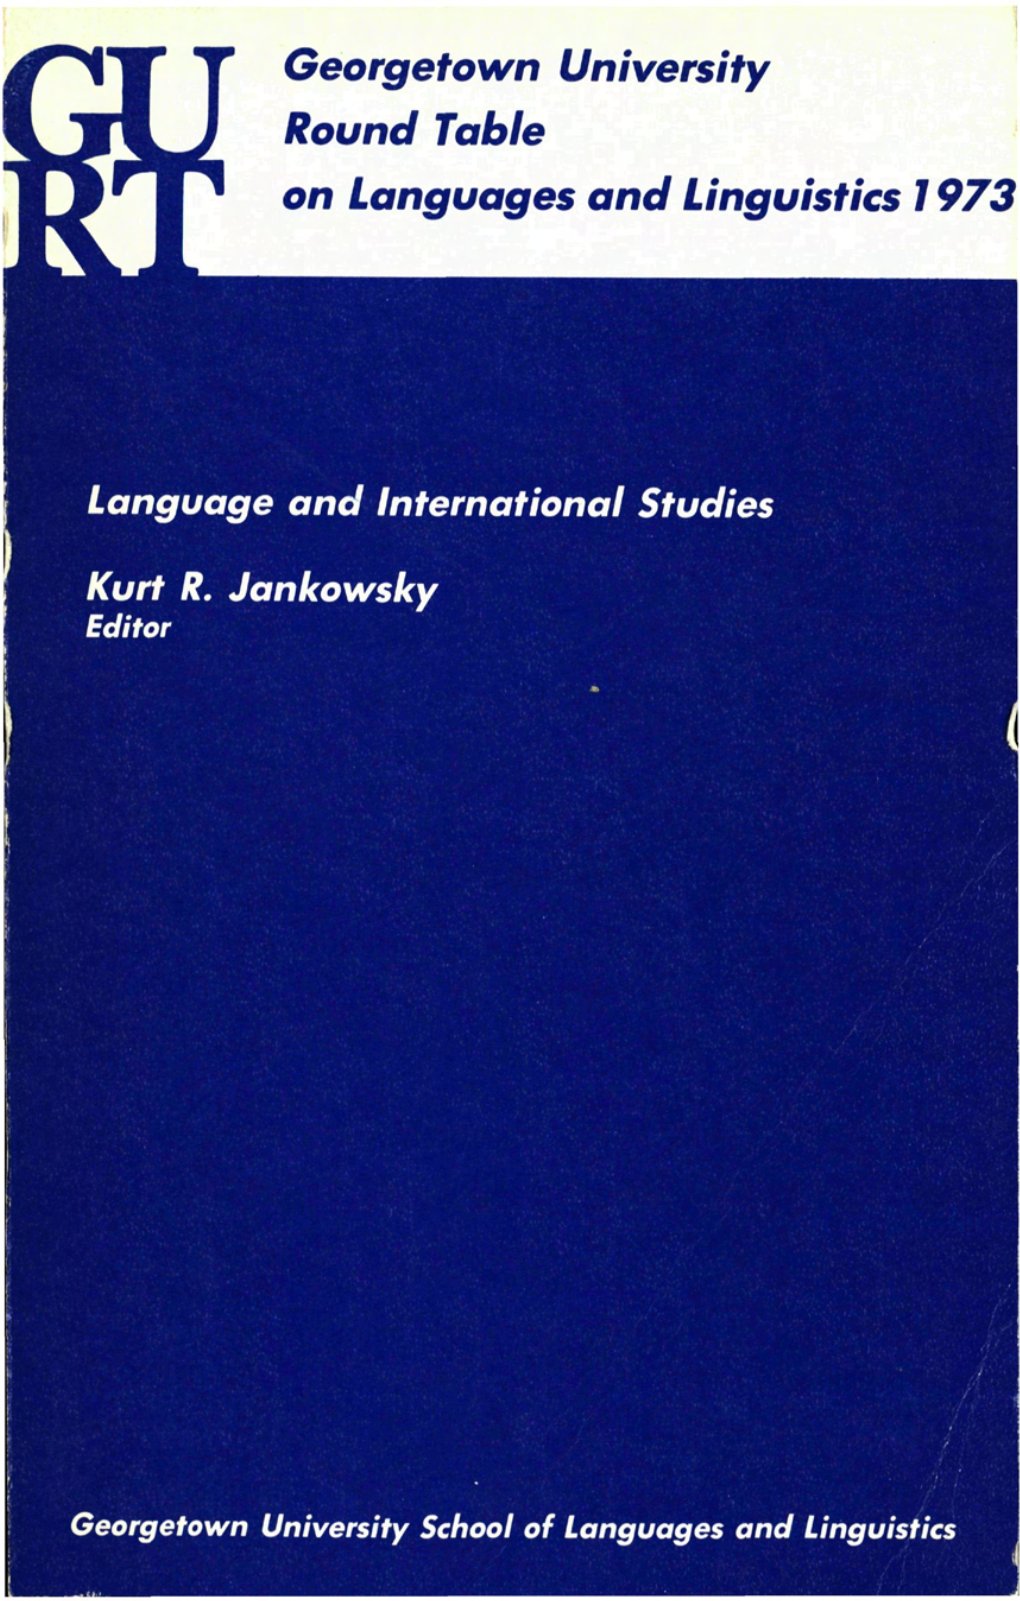 Georgetown University Round Table on Languages and Linguistics 1973